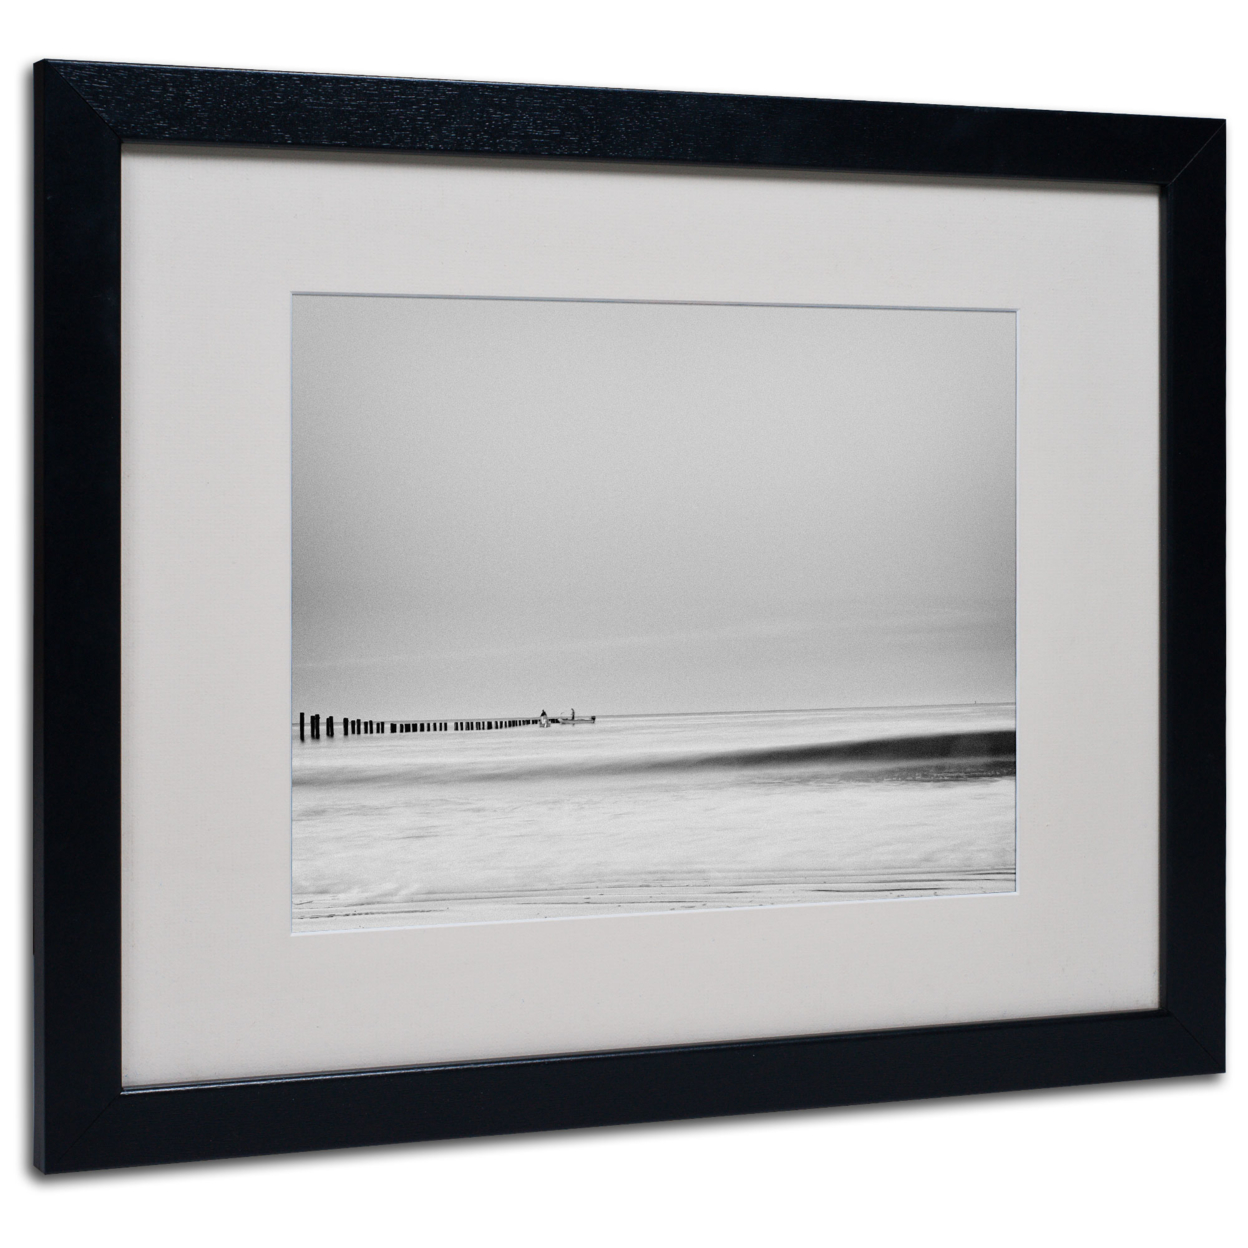 Geoffrey Ansel Agrons 'Phase Encoding' Black Wooden Framed Art 18 X 22 Inches